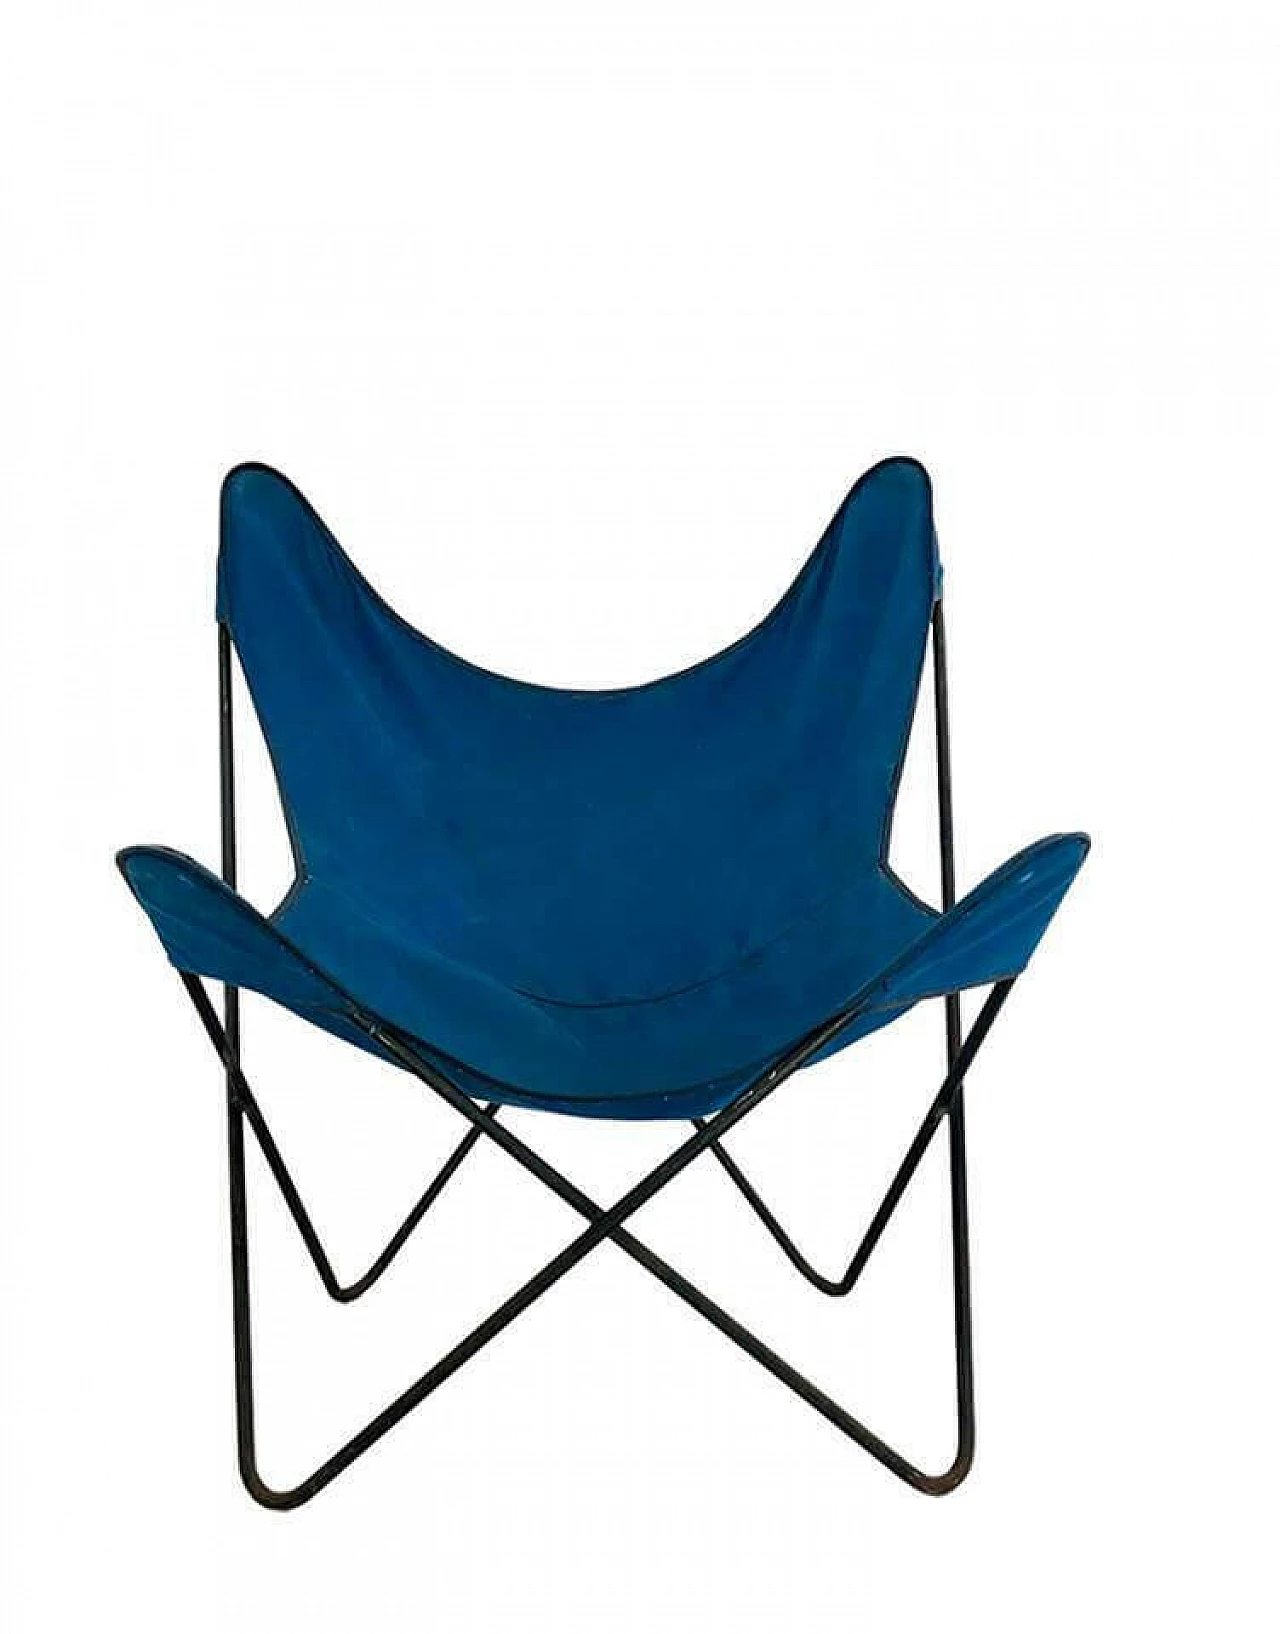 Butterfly armchair by Jeorge Hardoy Ferrari for Knoll, 70's 1110060